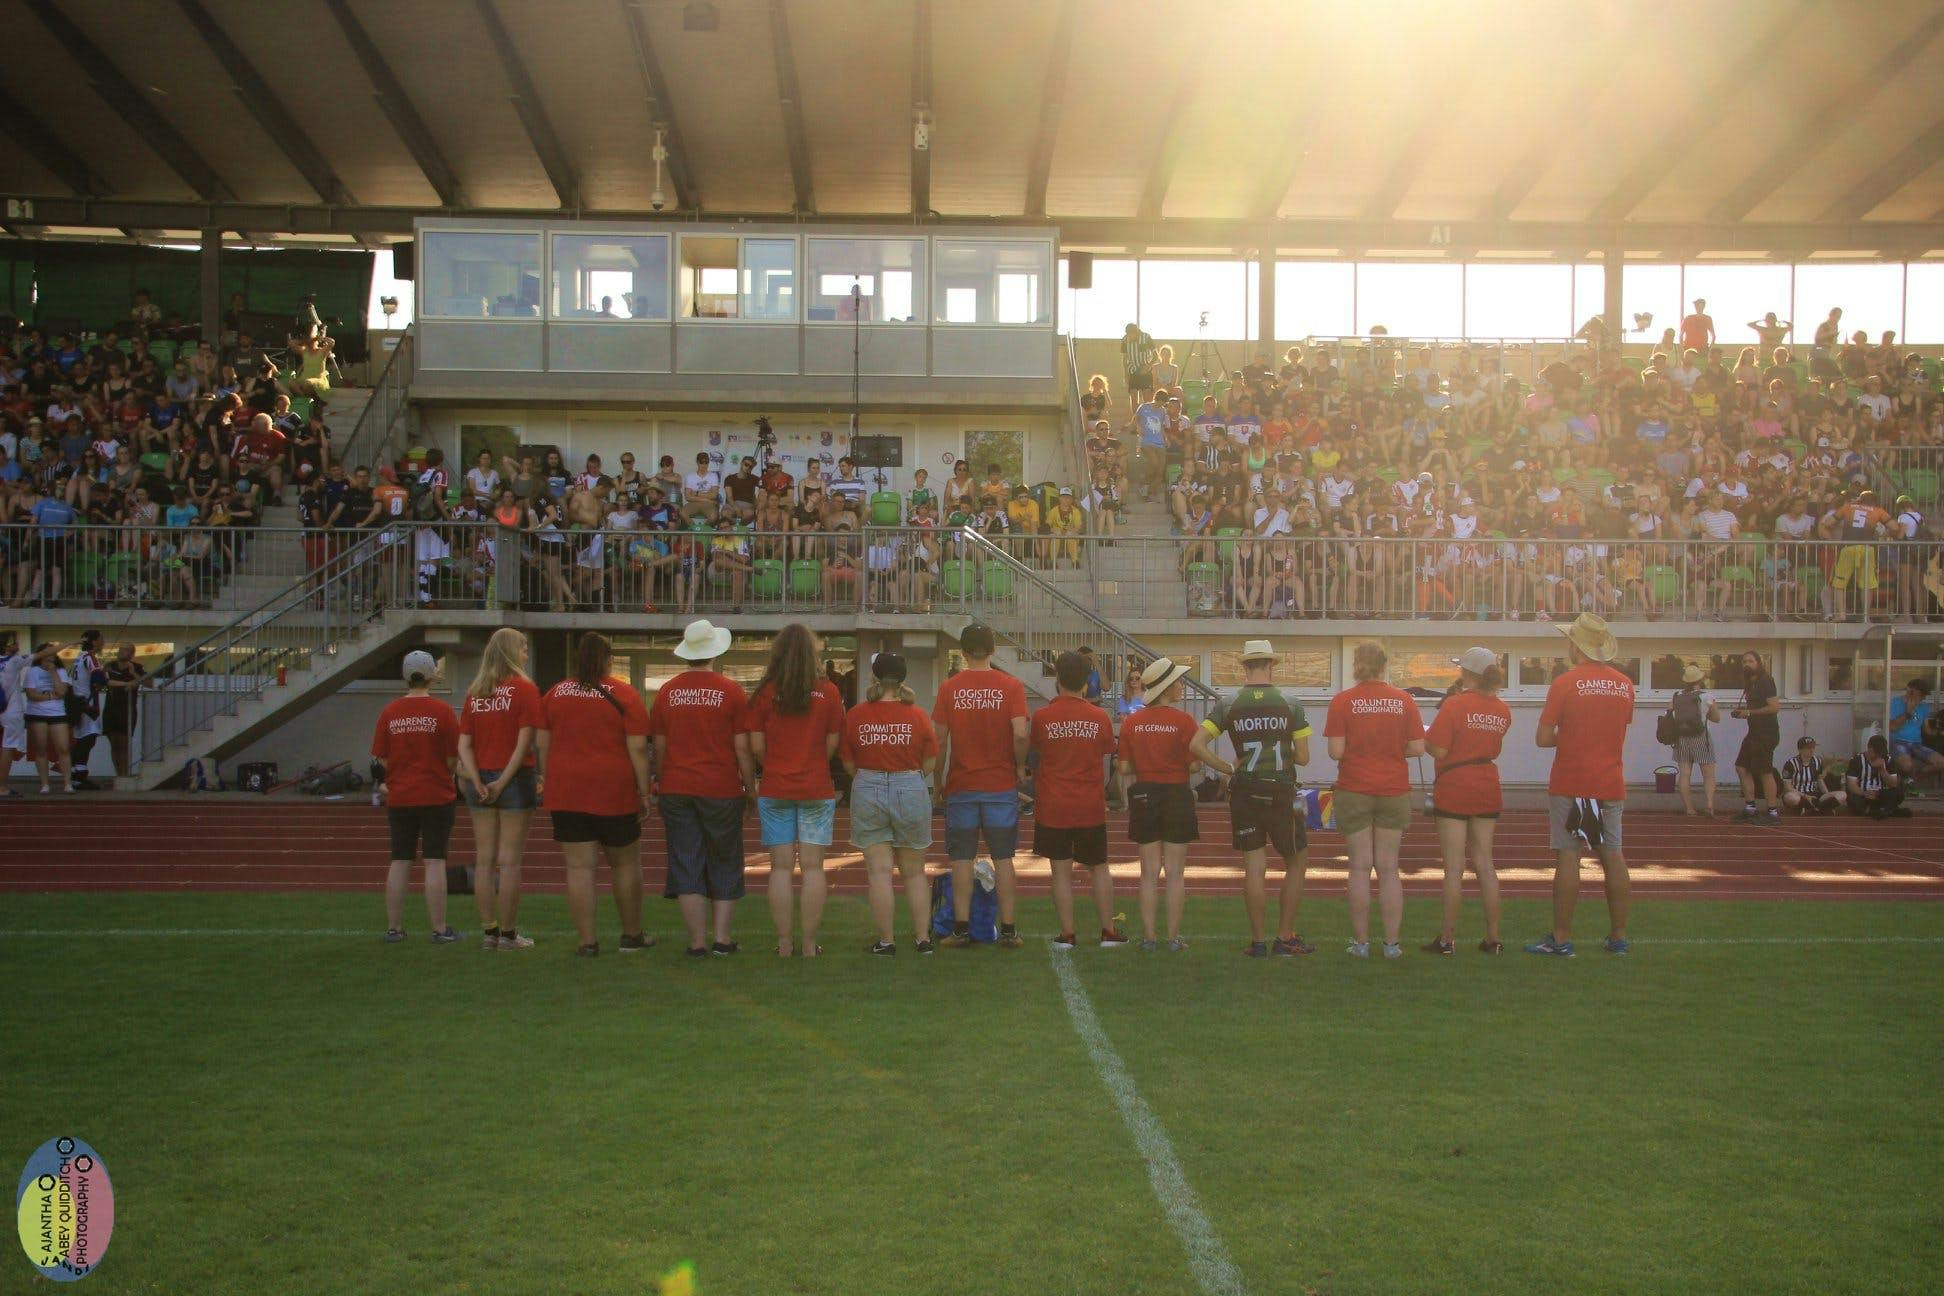 Line of volunteers with their backs to the camera facing a full stadium of fans